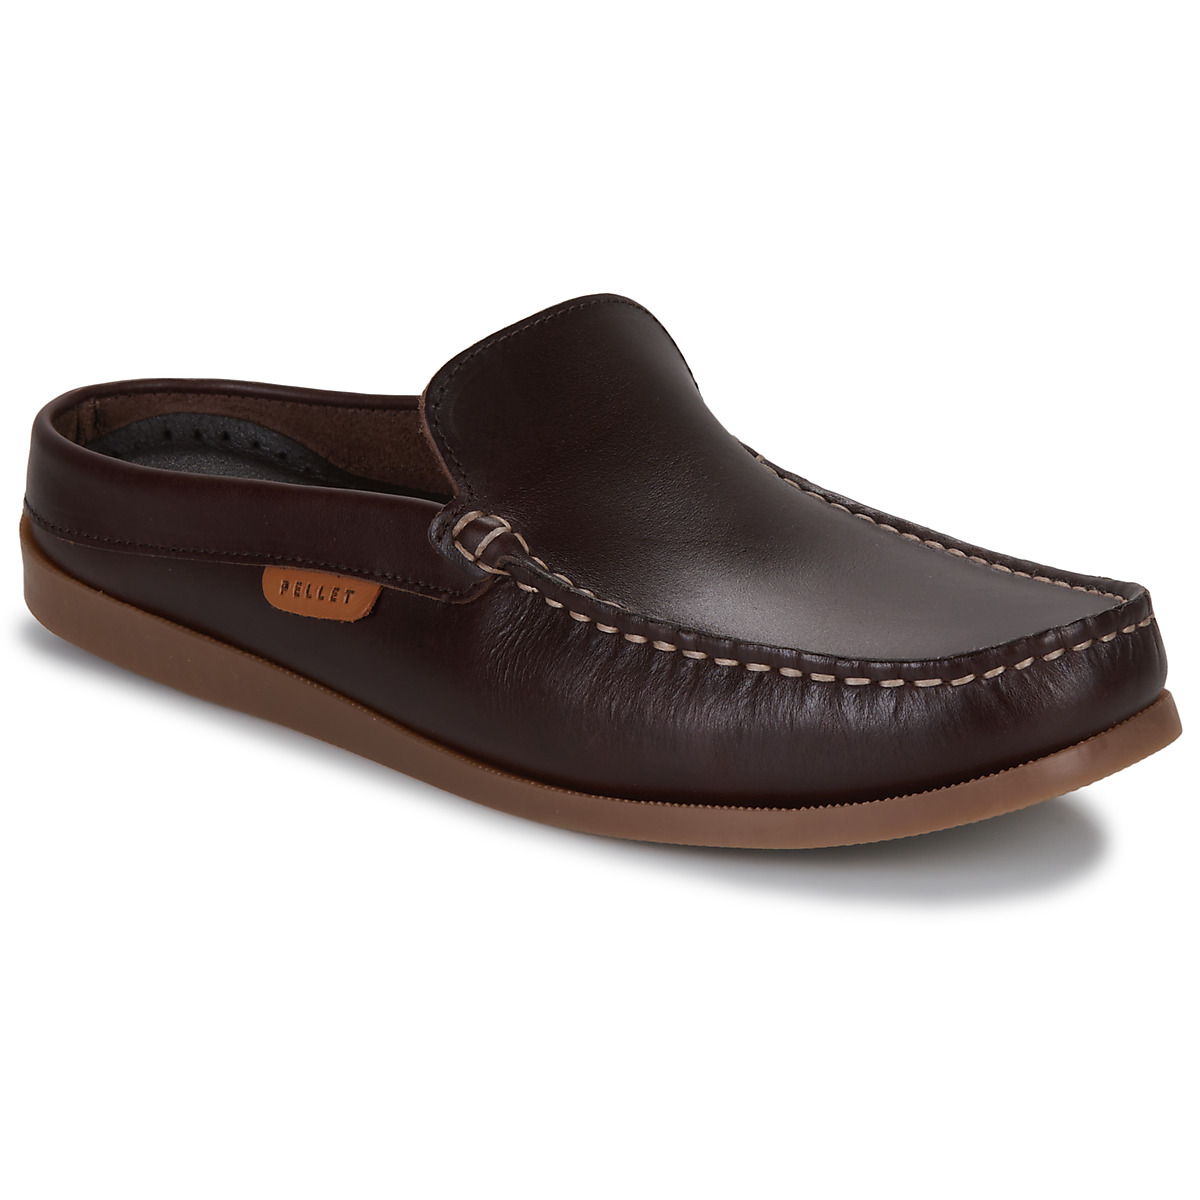 Shoes Men Mules Pellet MAXIME Veal / Pull / Cup / Brown